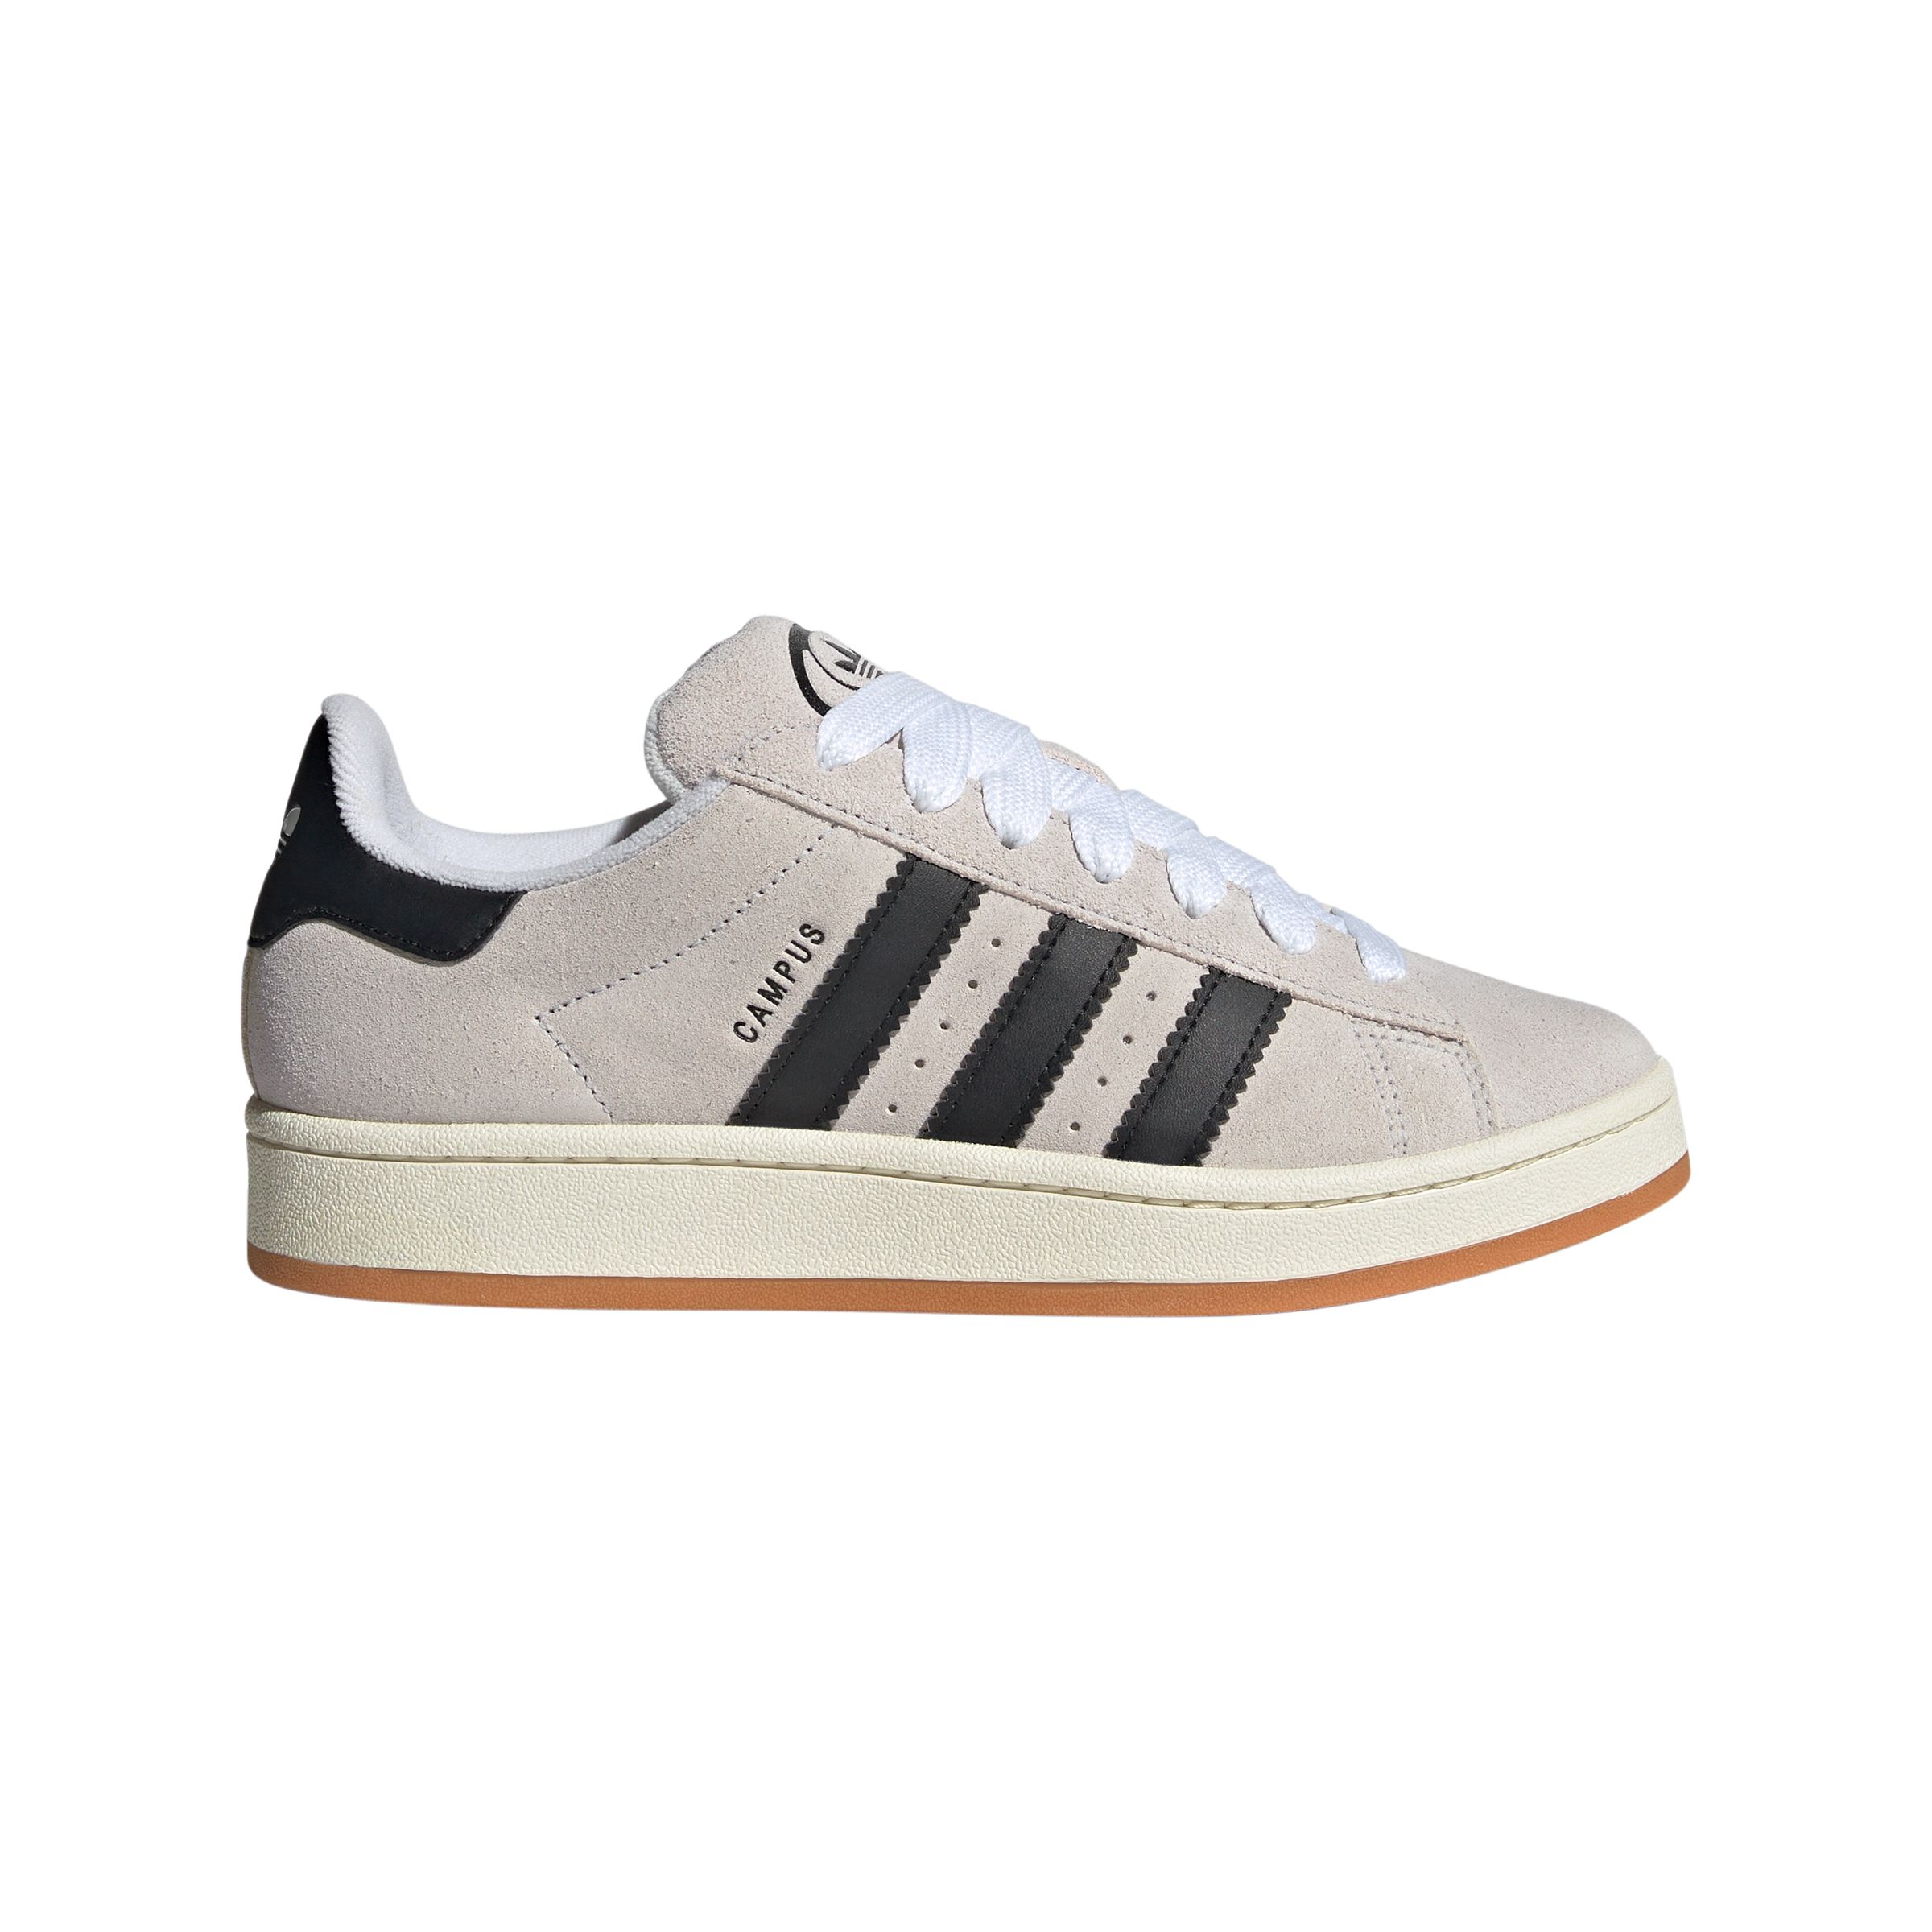 Image of adidas Women's Campus Shoes